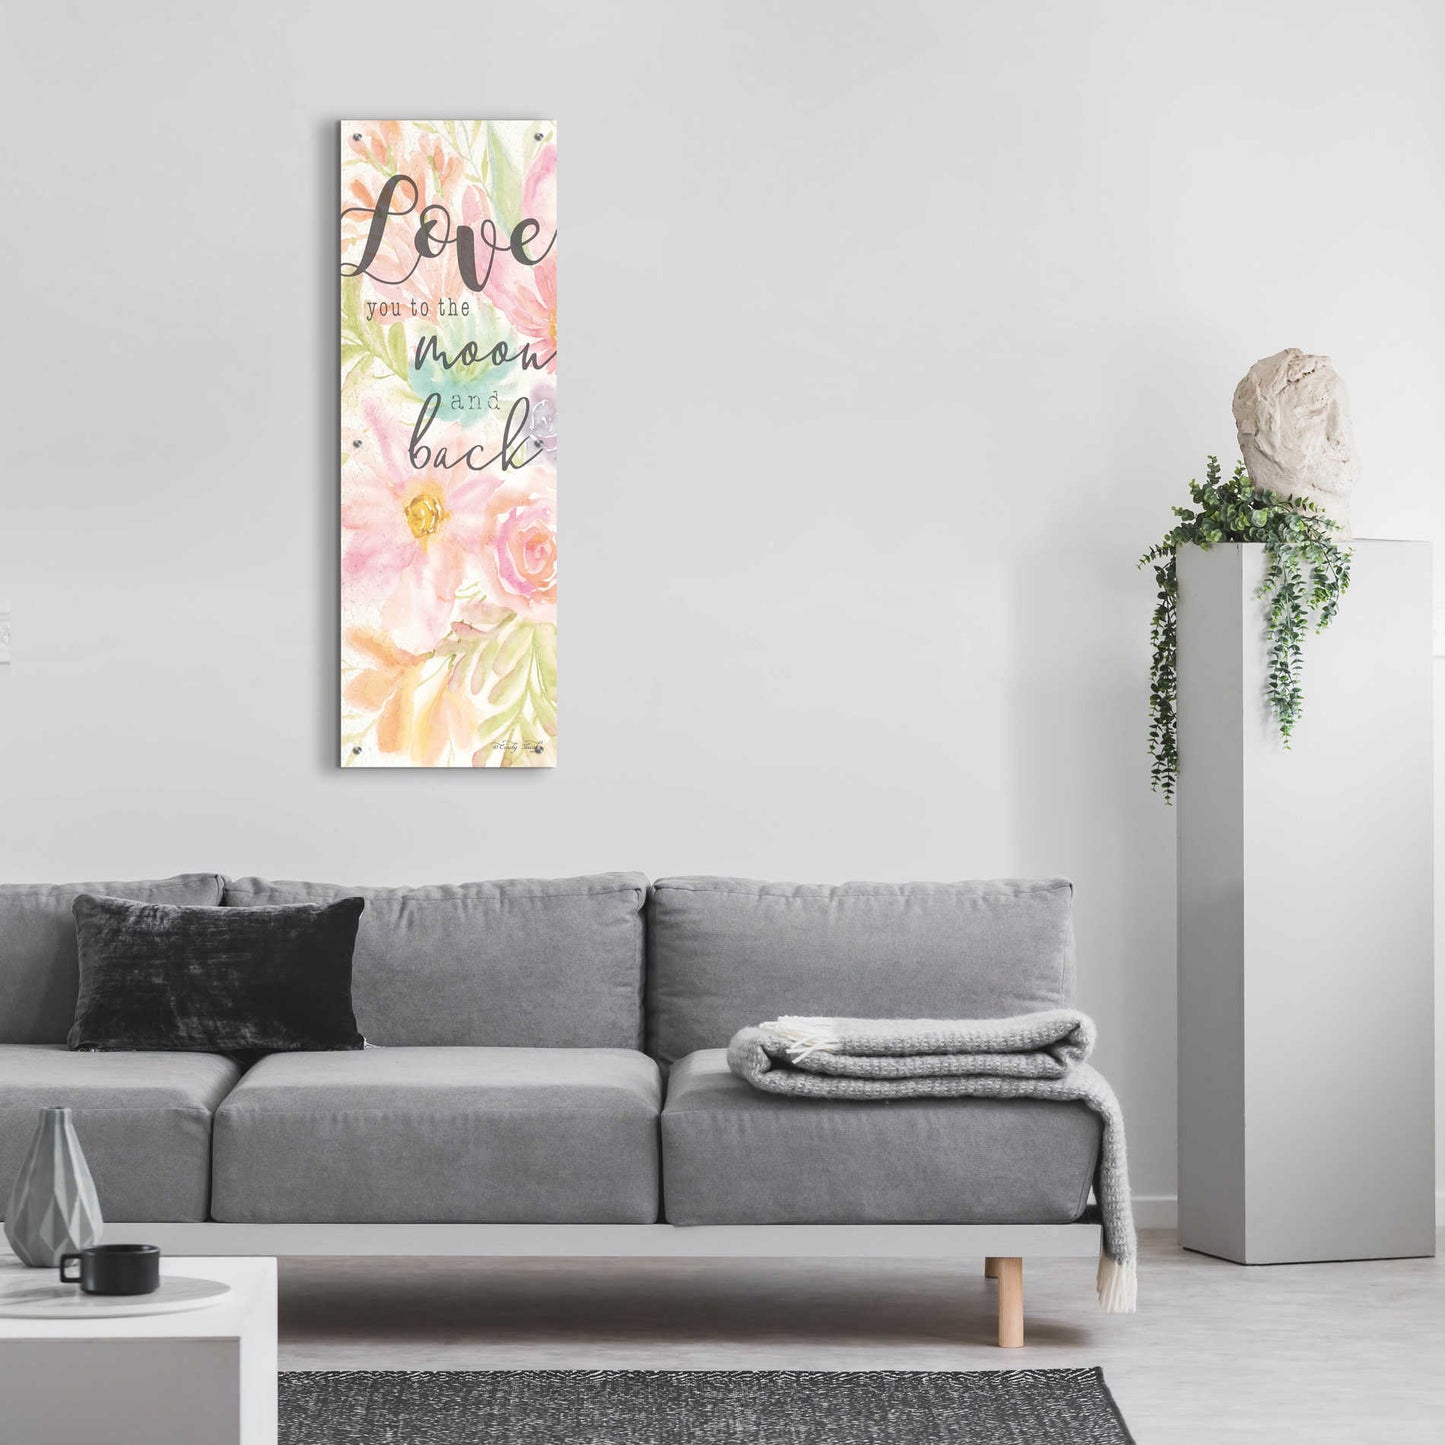 Epic Art 'I Love You to the Moon and Back' by Cindy Jacobs, Acrylic Glass Wall Art,16x48